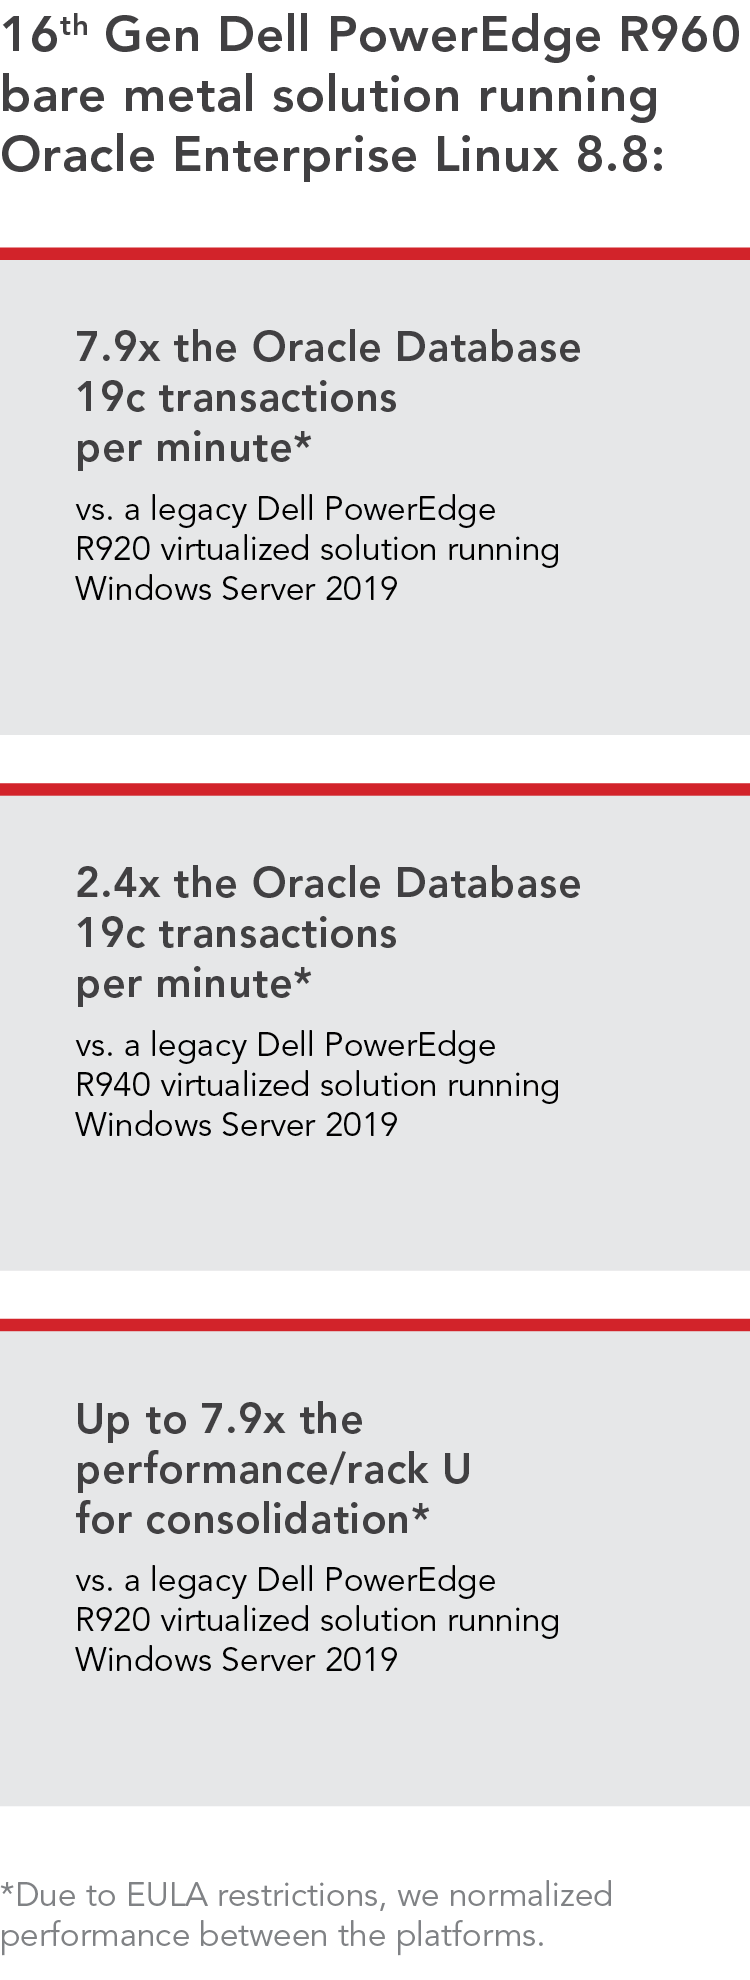 7.9 times the Oracle Database 19c transactions per minute versus a legacy Dell PowerEdge R920 virtualized solution running Windows Server 2019. 2.4 times the Oracle Database 19c transactions per minute versus a legacy Dell PowerEdge R920 virtualized solution running Windows Server 2019. Up to 7.9 times the performance per rack unit for consolidation versus a legacy Dell PowerEdge R920 virtualized solution running Windows Server 2019. Due to EULA restrictions, we normalized performance between the platforms.